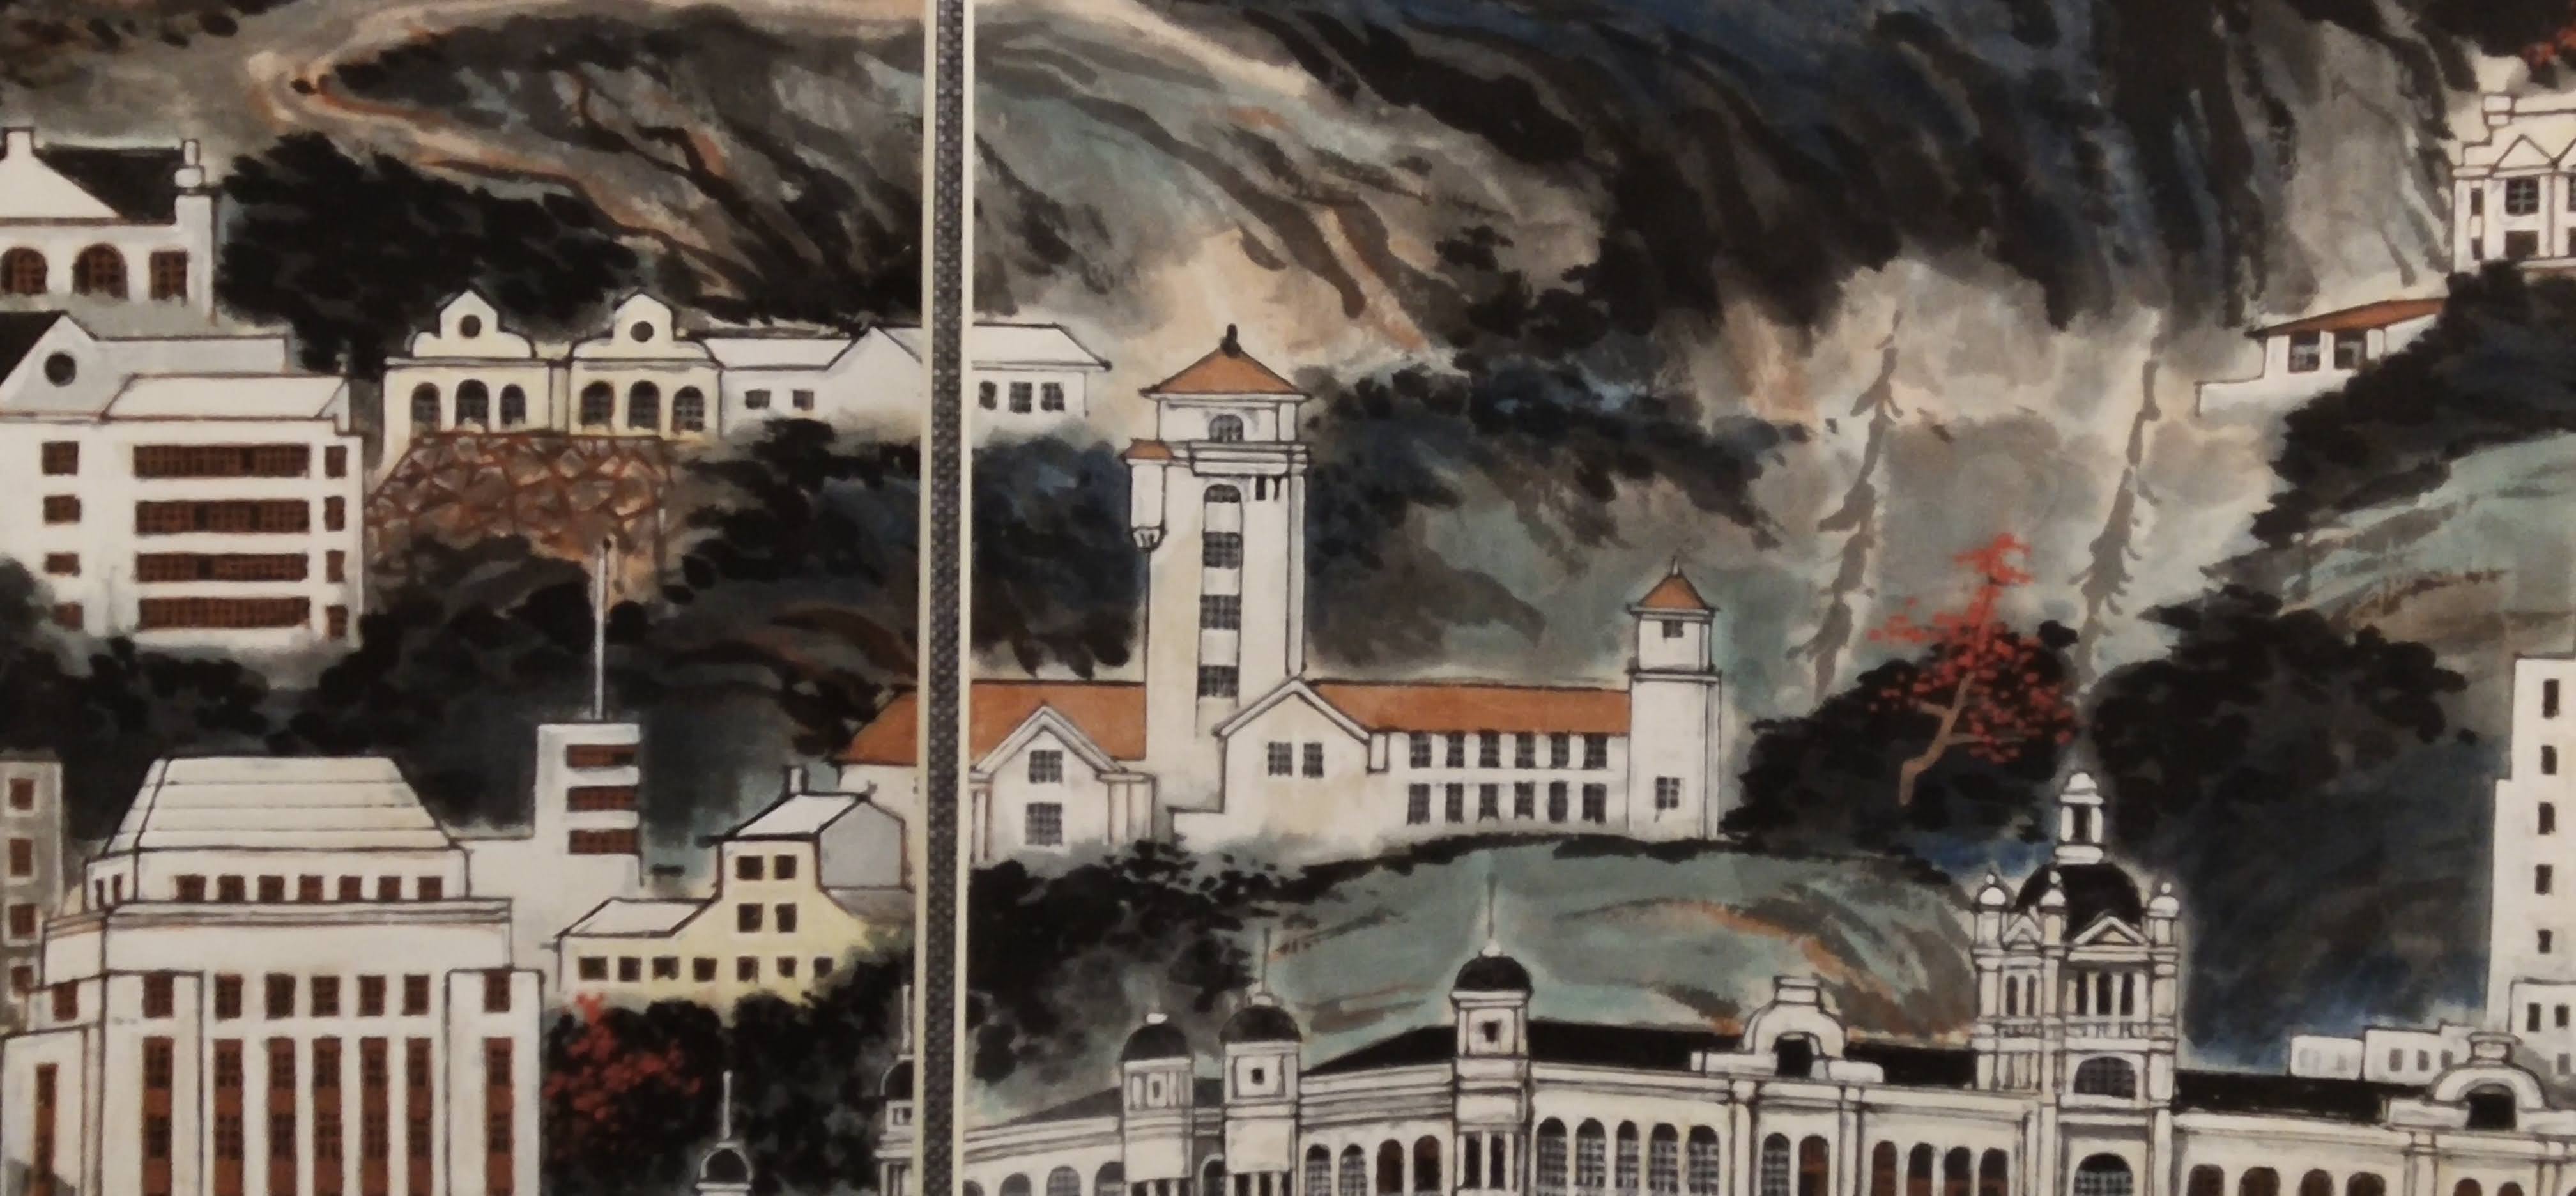 Hong Kong Government House (the white tower) in the old painting. Now because of other tall buildings, it cannot be seen from Kowloon anymore.